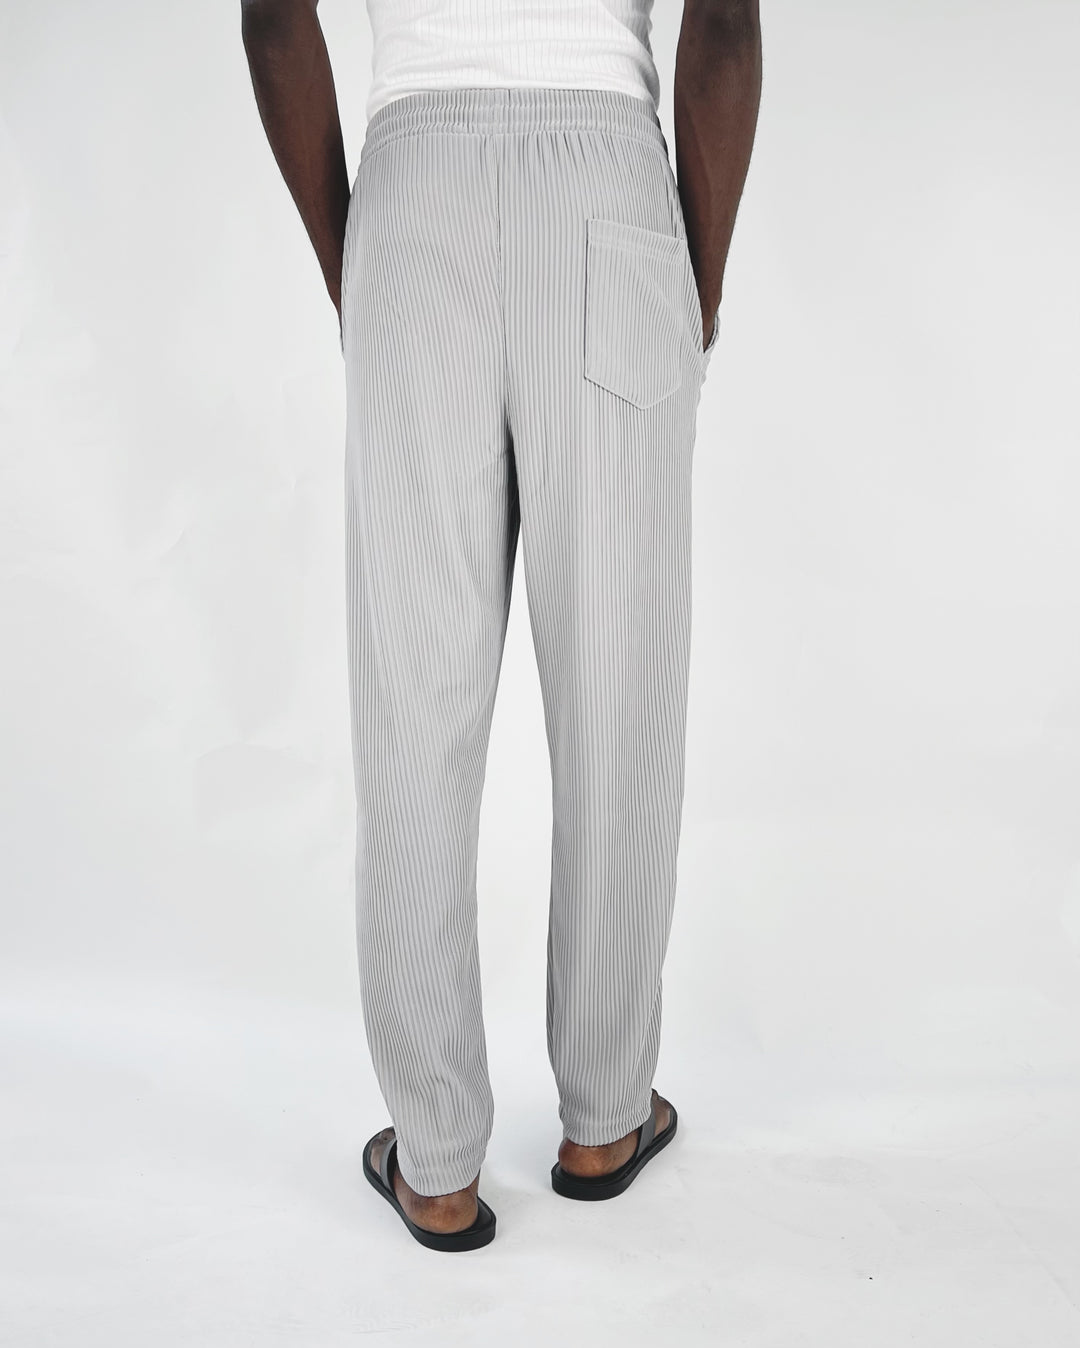 Spruce pleated pants with toggle drawstring in gray